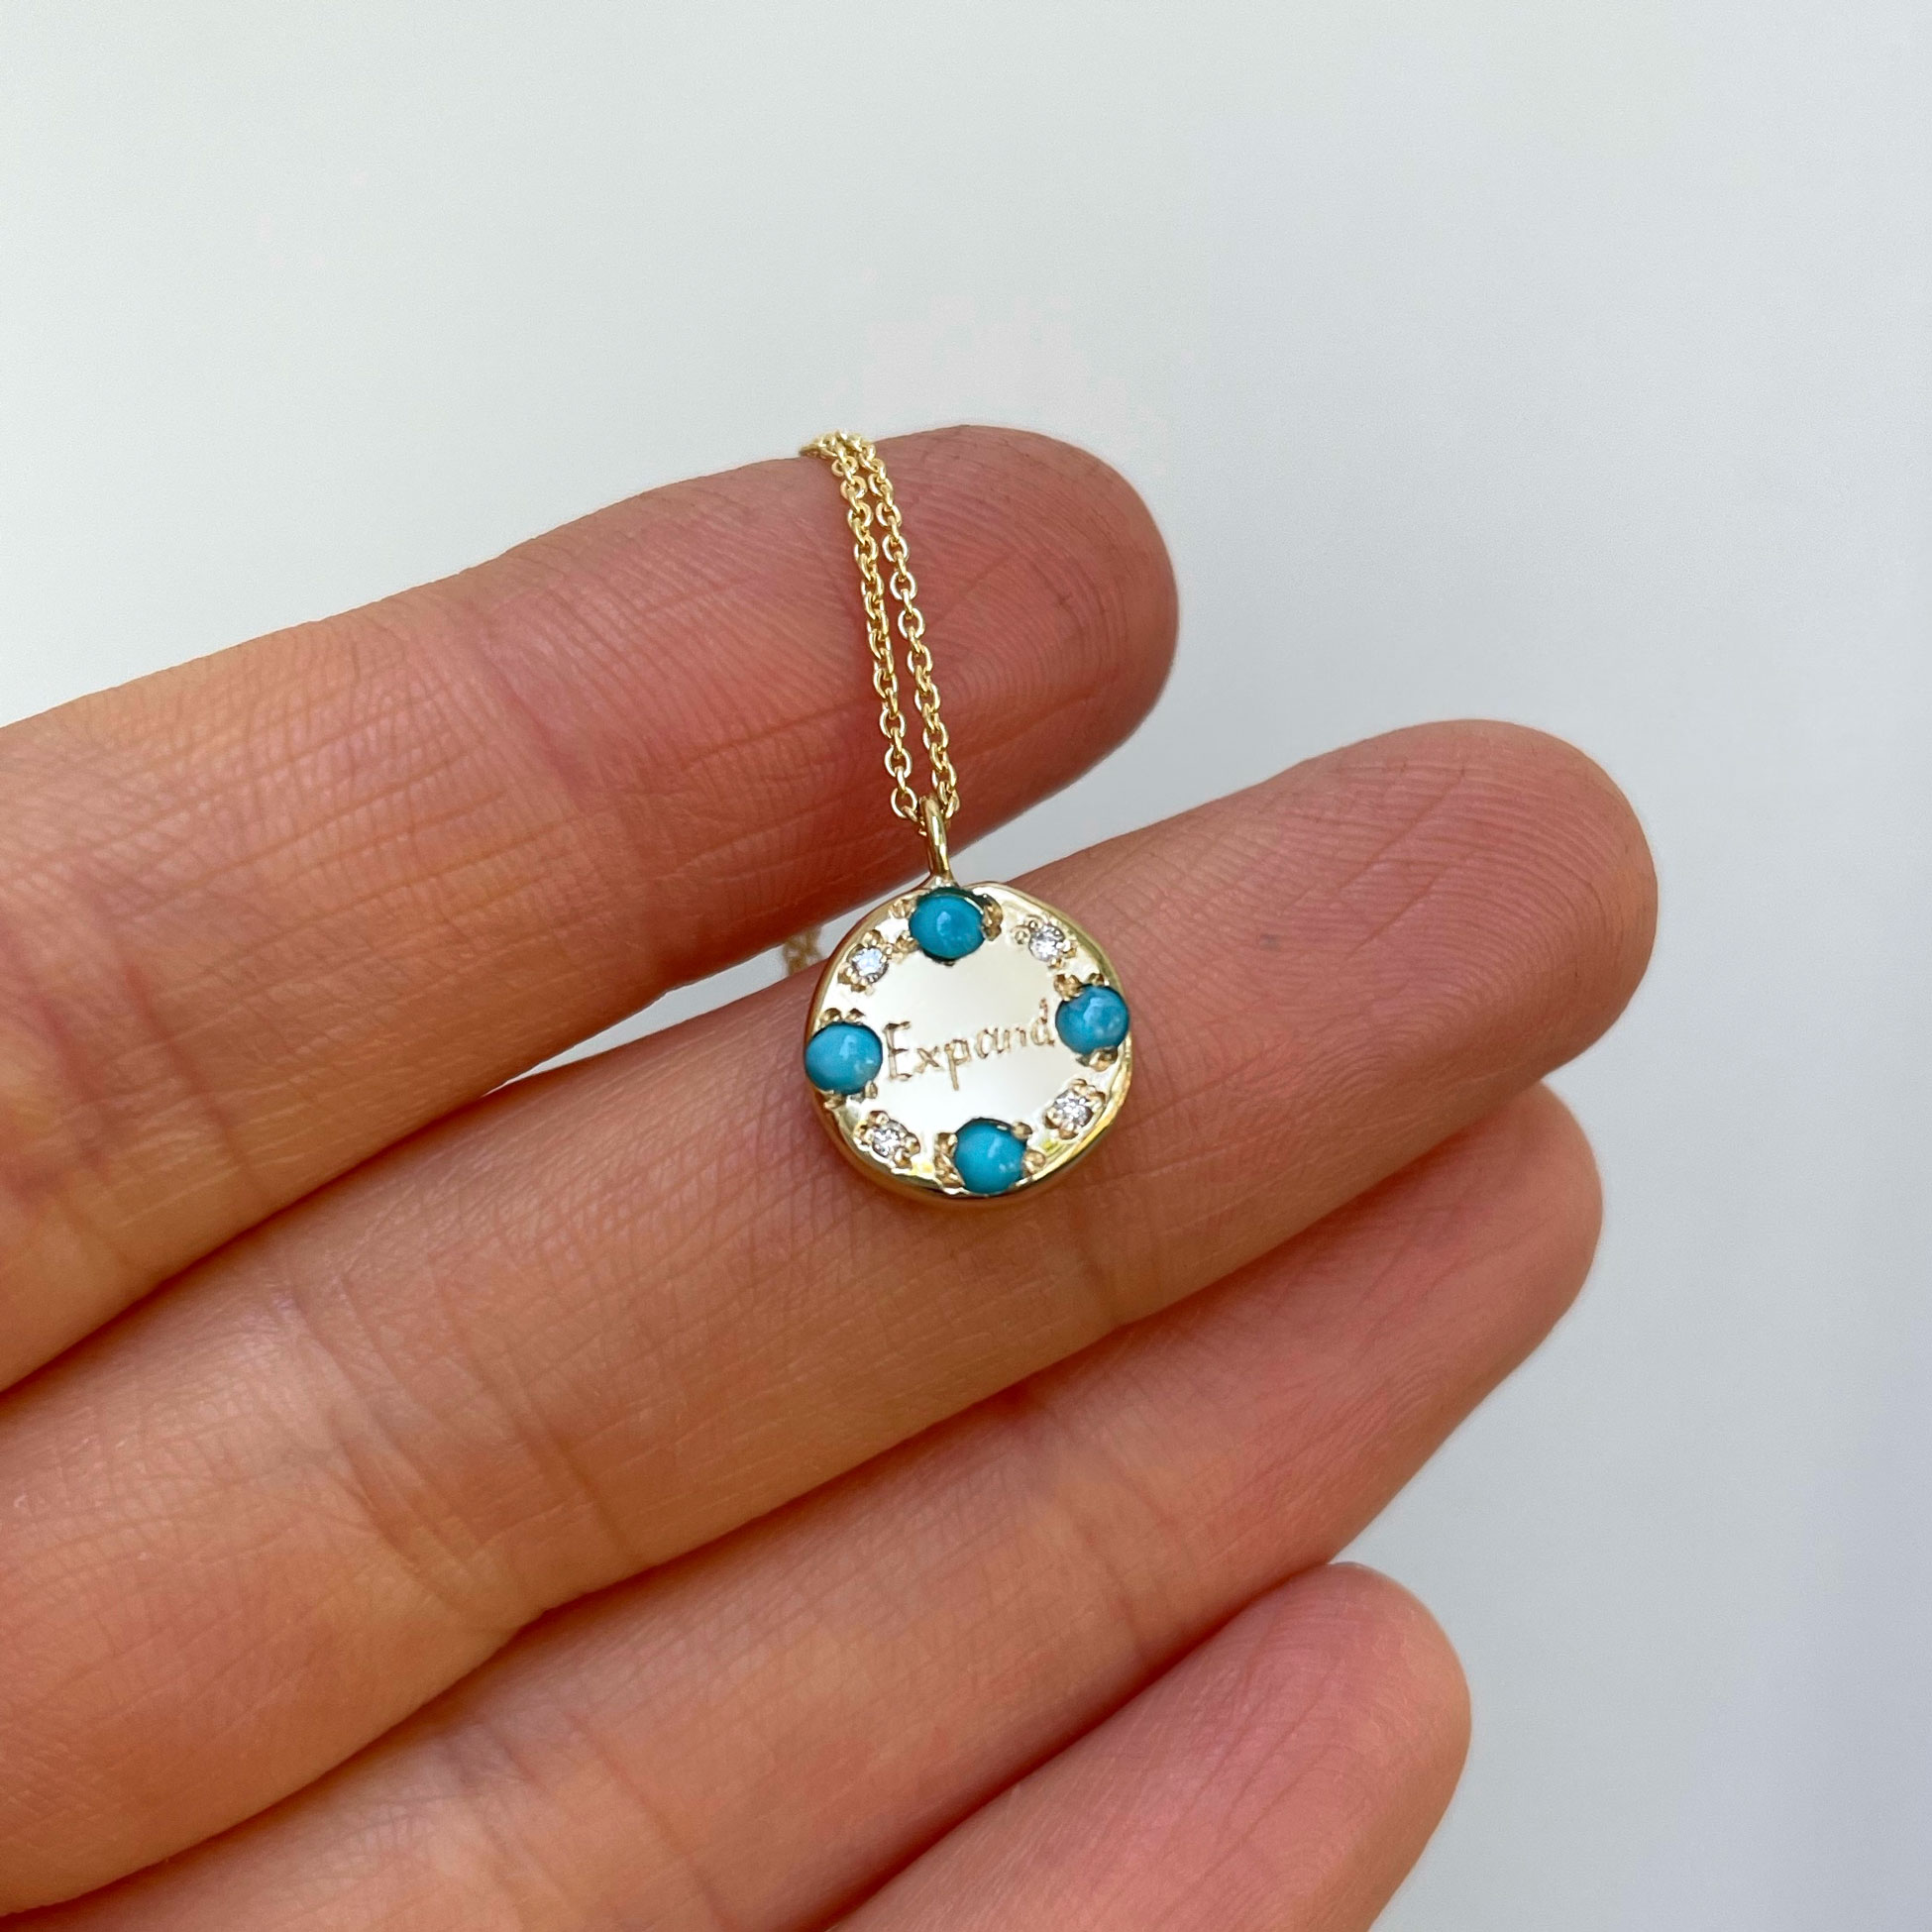 personalized circle charm necklaces with gemstones, diamonds and engraving